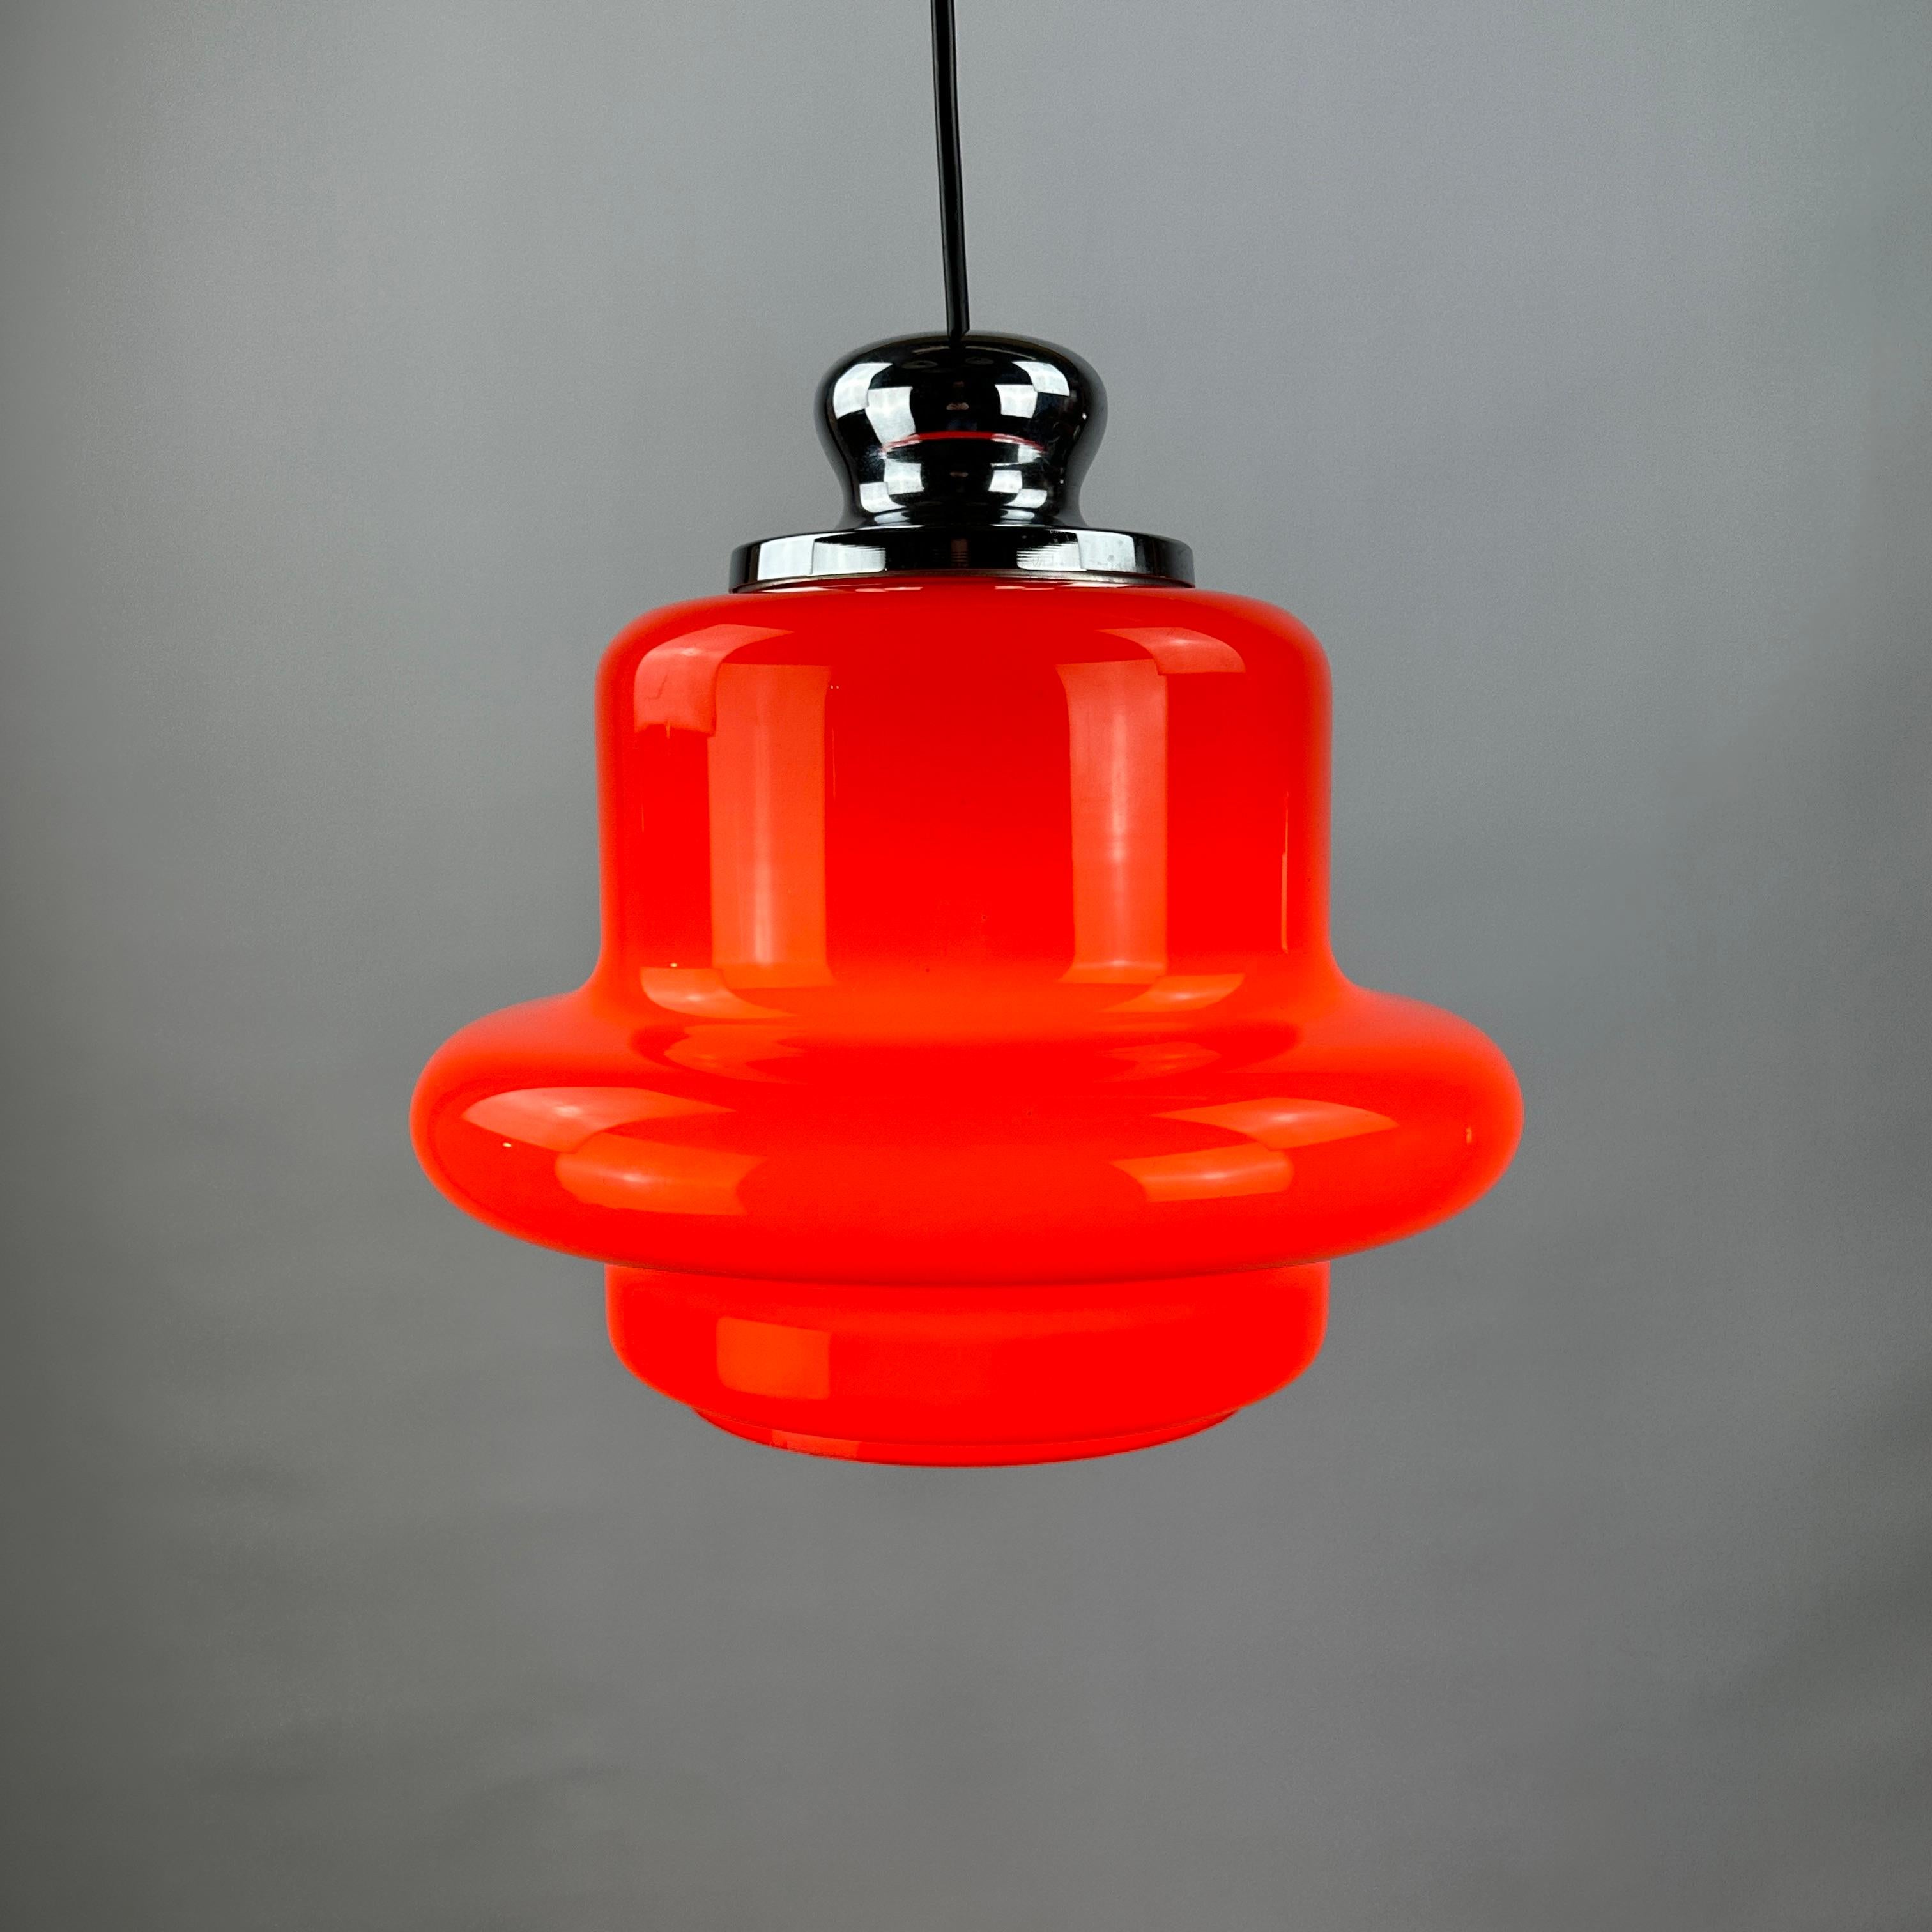 This stunning piece of German craftsmanship is by Hustadt Leuchten made around 1960. The lamp is made from opaline glass, has a ufo shape and lights up very cool. The top is made from aluminium. 

The light will fill your space with a vibrant,